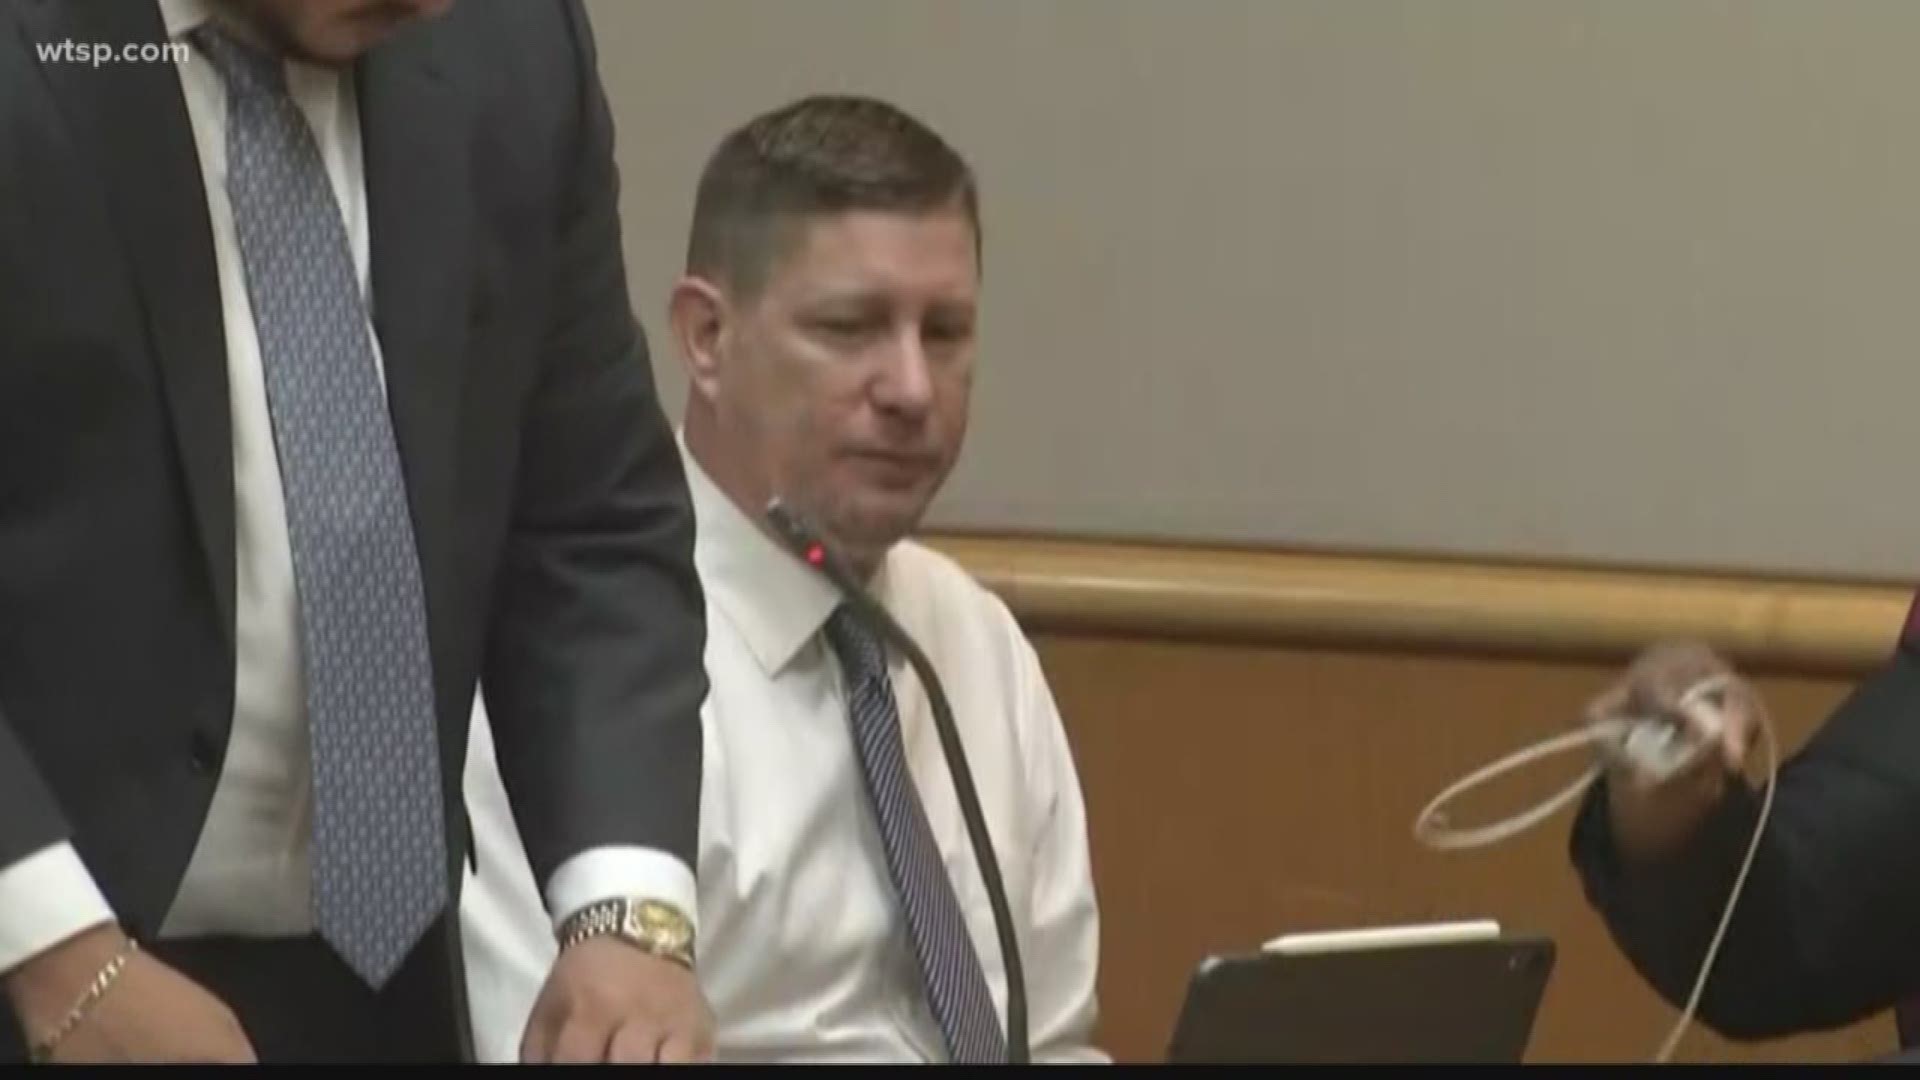 The lawyers for the accused shooter asked the court not to allow any testimony about previous fights he had been in. Micheal Drejka is accused of shooting and killing a man after an argument over a parking space.